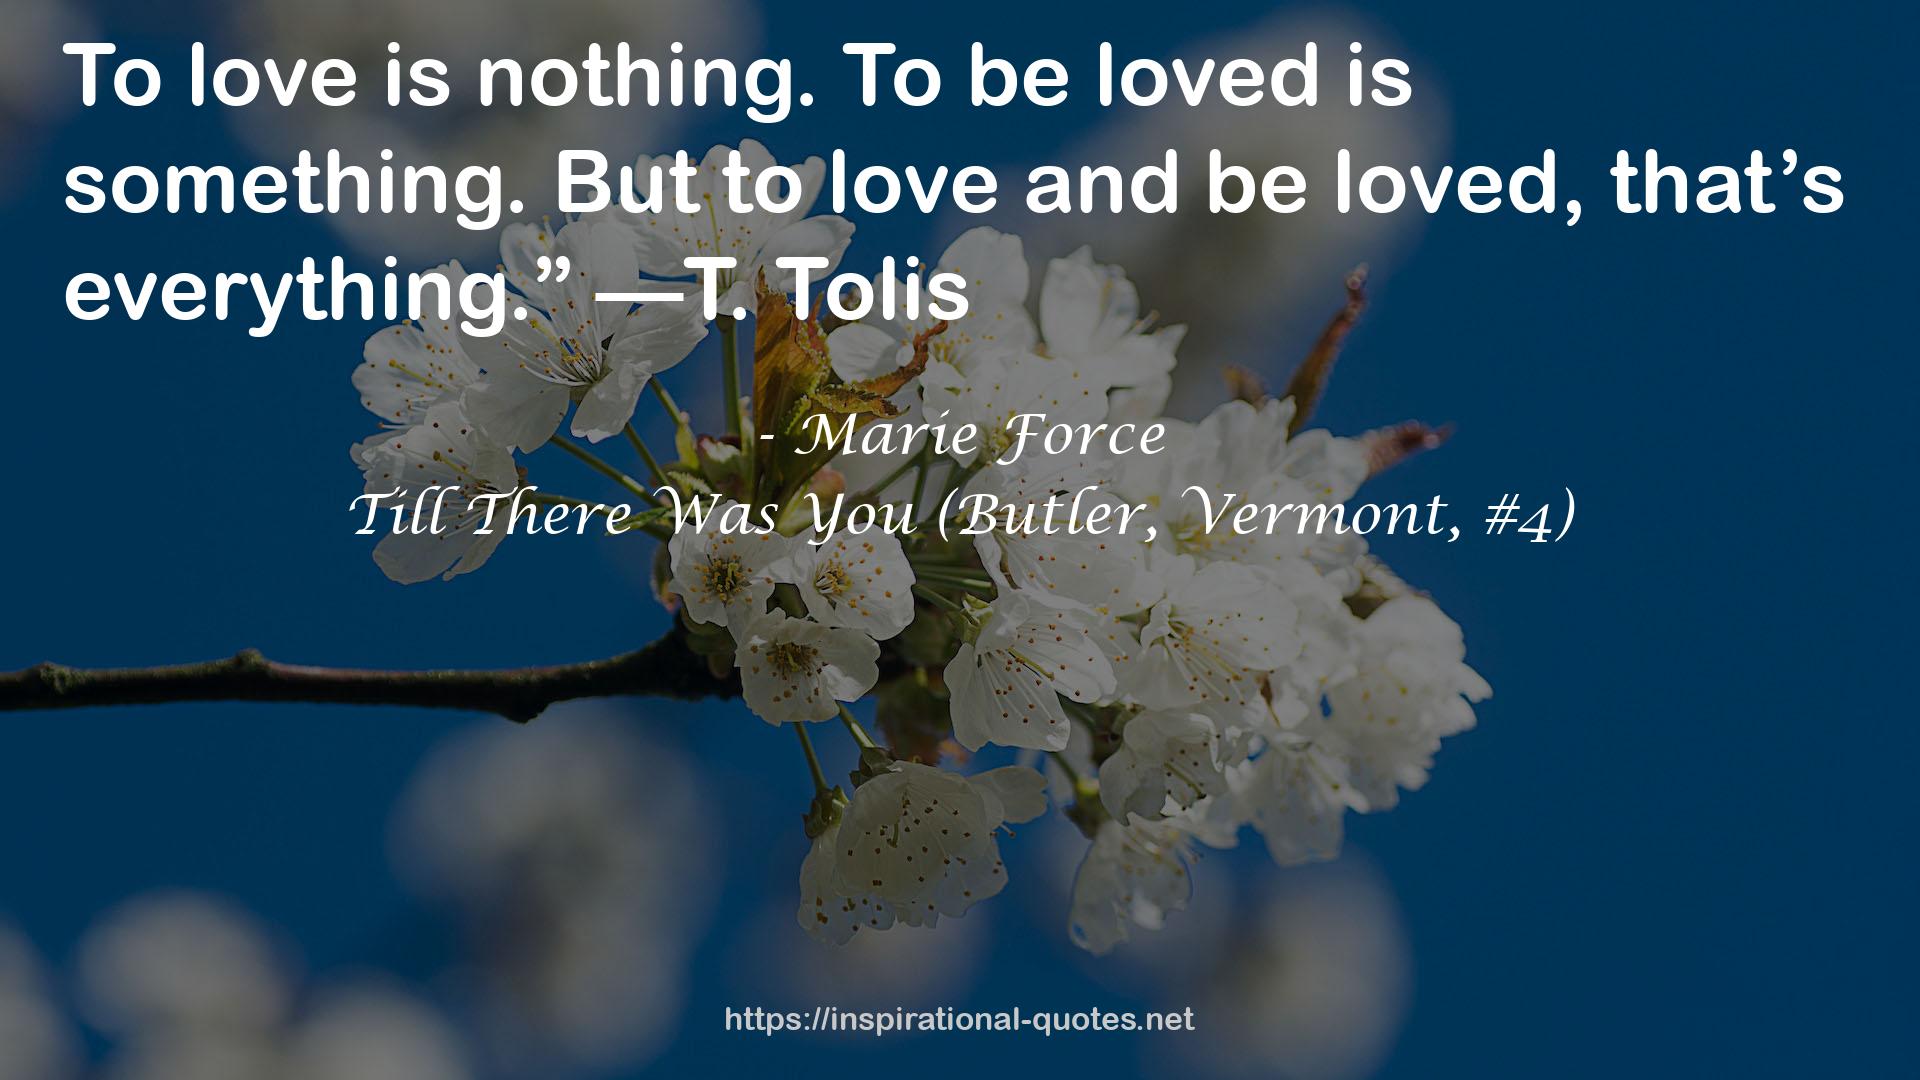 Till There Was You (Butler, Vermont, #4) QUOTES